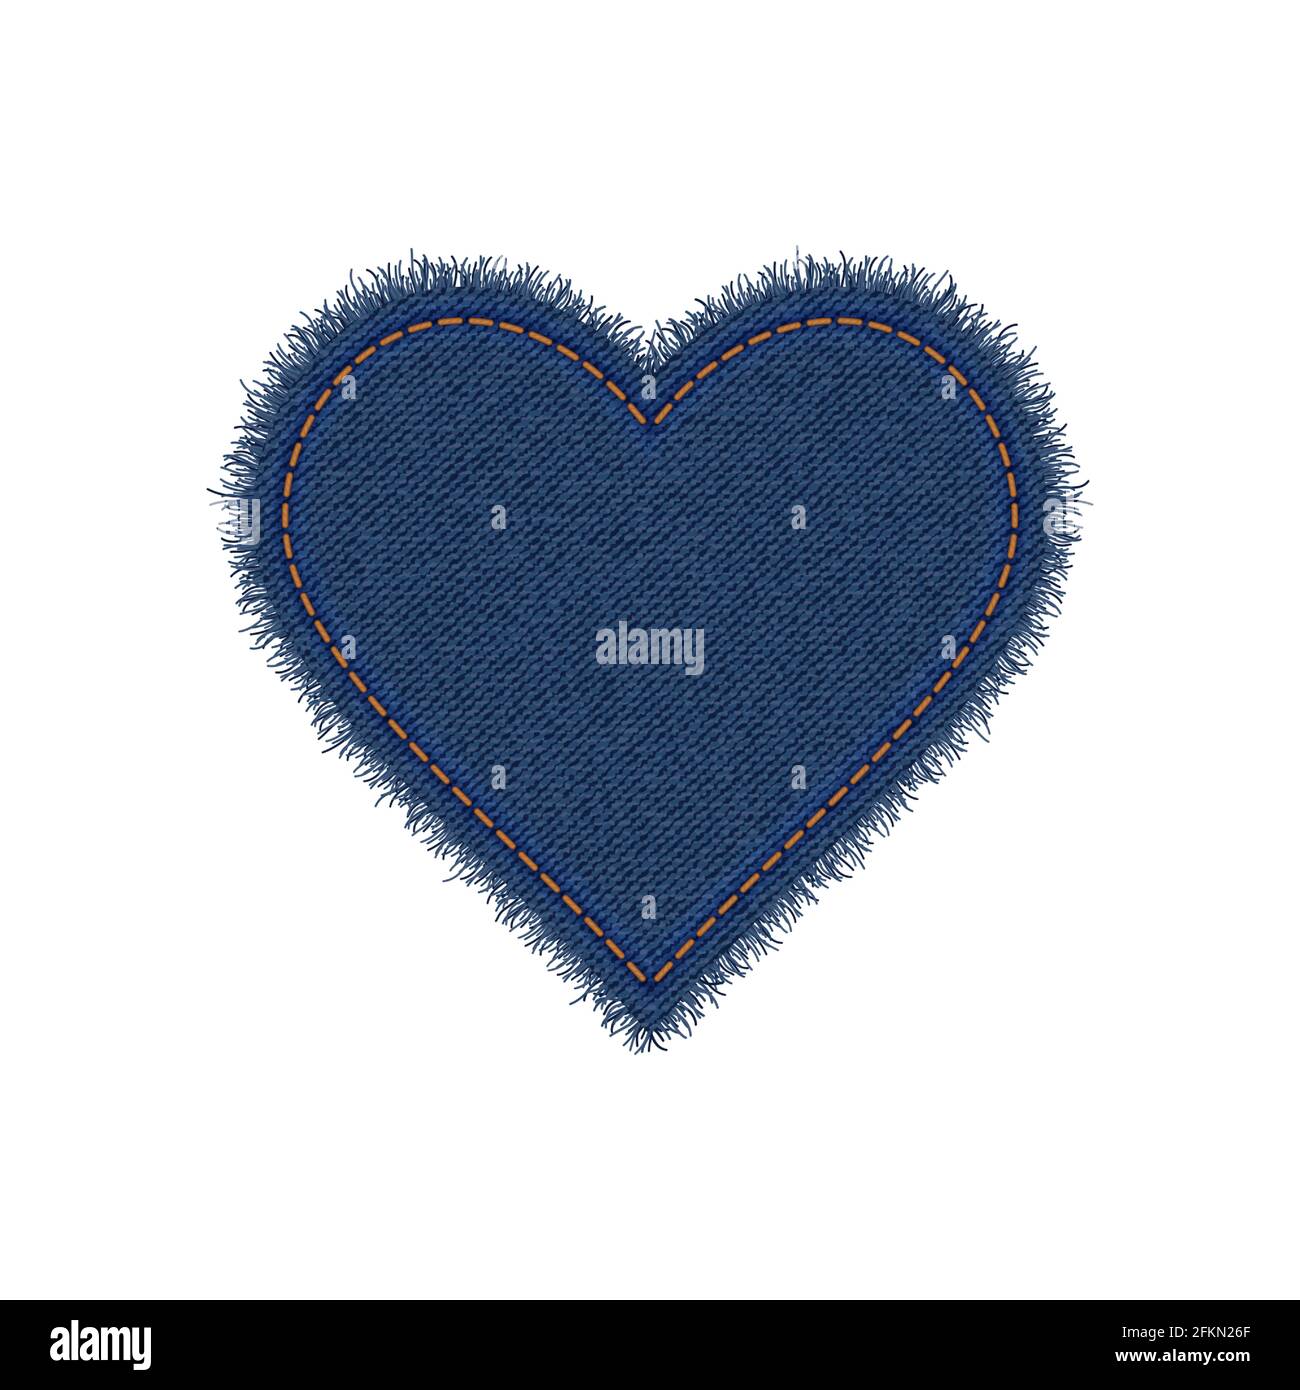 Denim Star Shape With Seam Torn Jean Patch With Stitches Vector